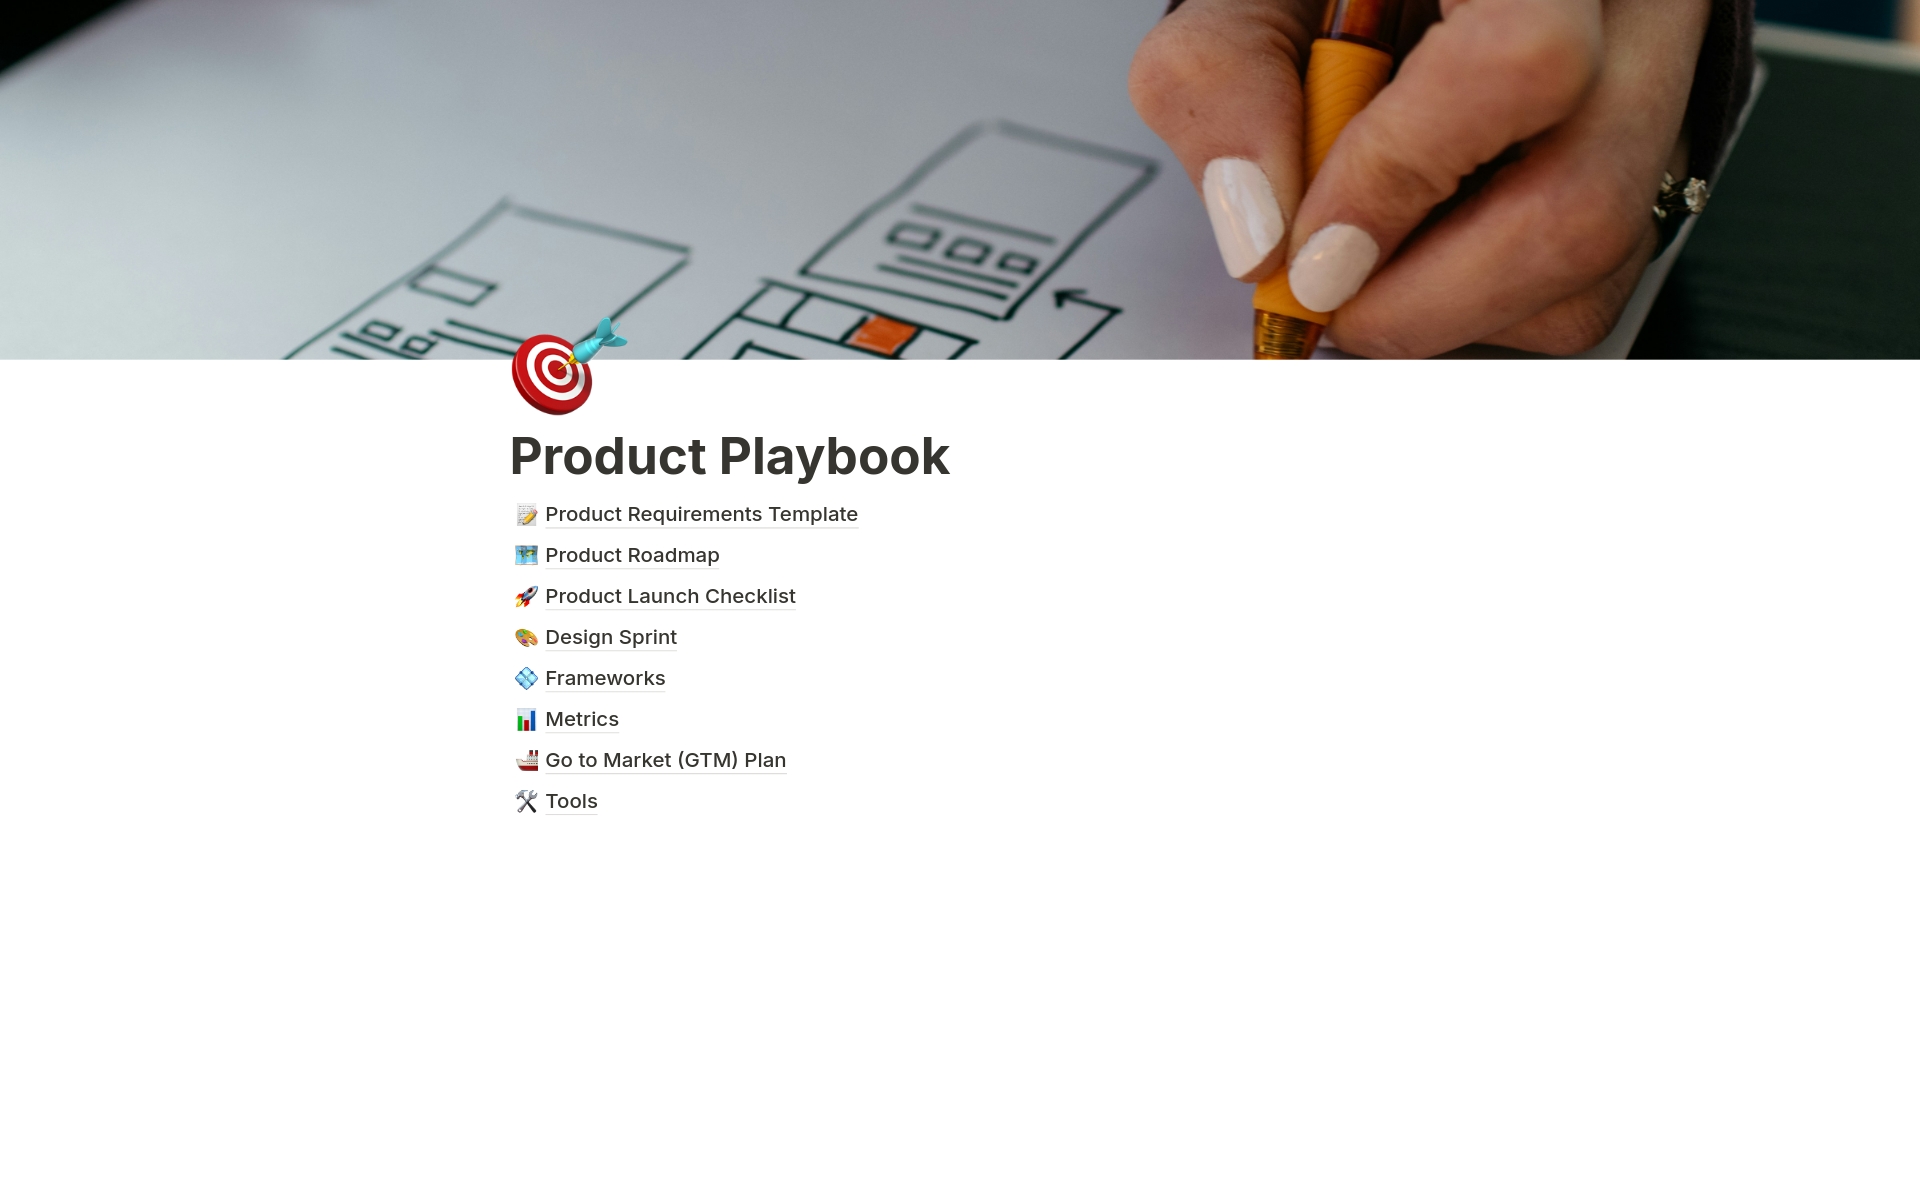 Product Playbook: Your Ultimate Guide to Successful Product Management